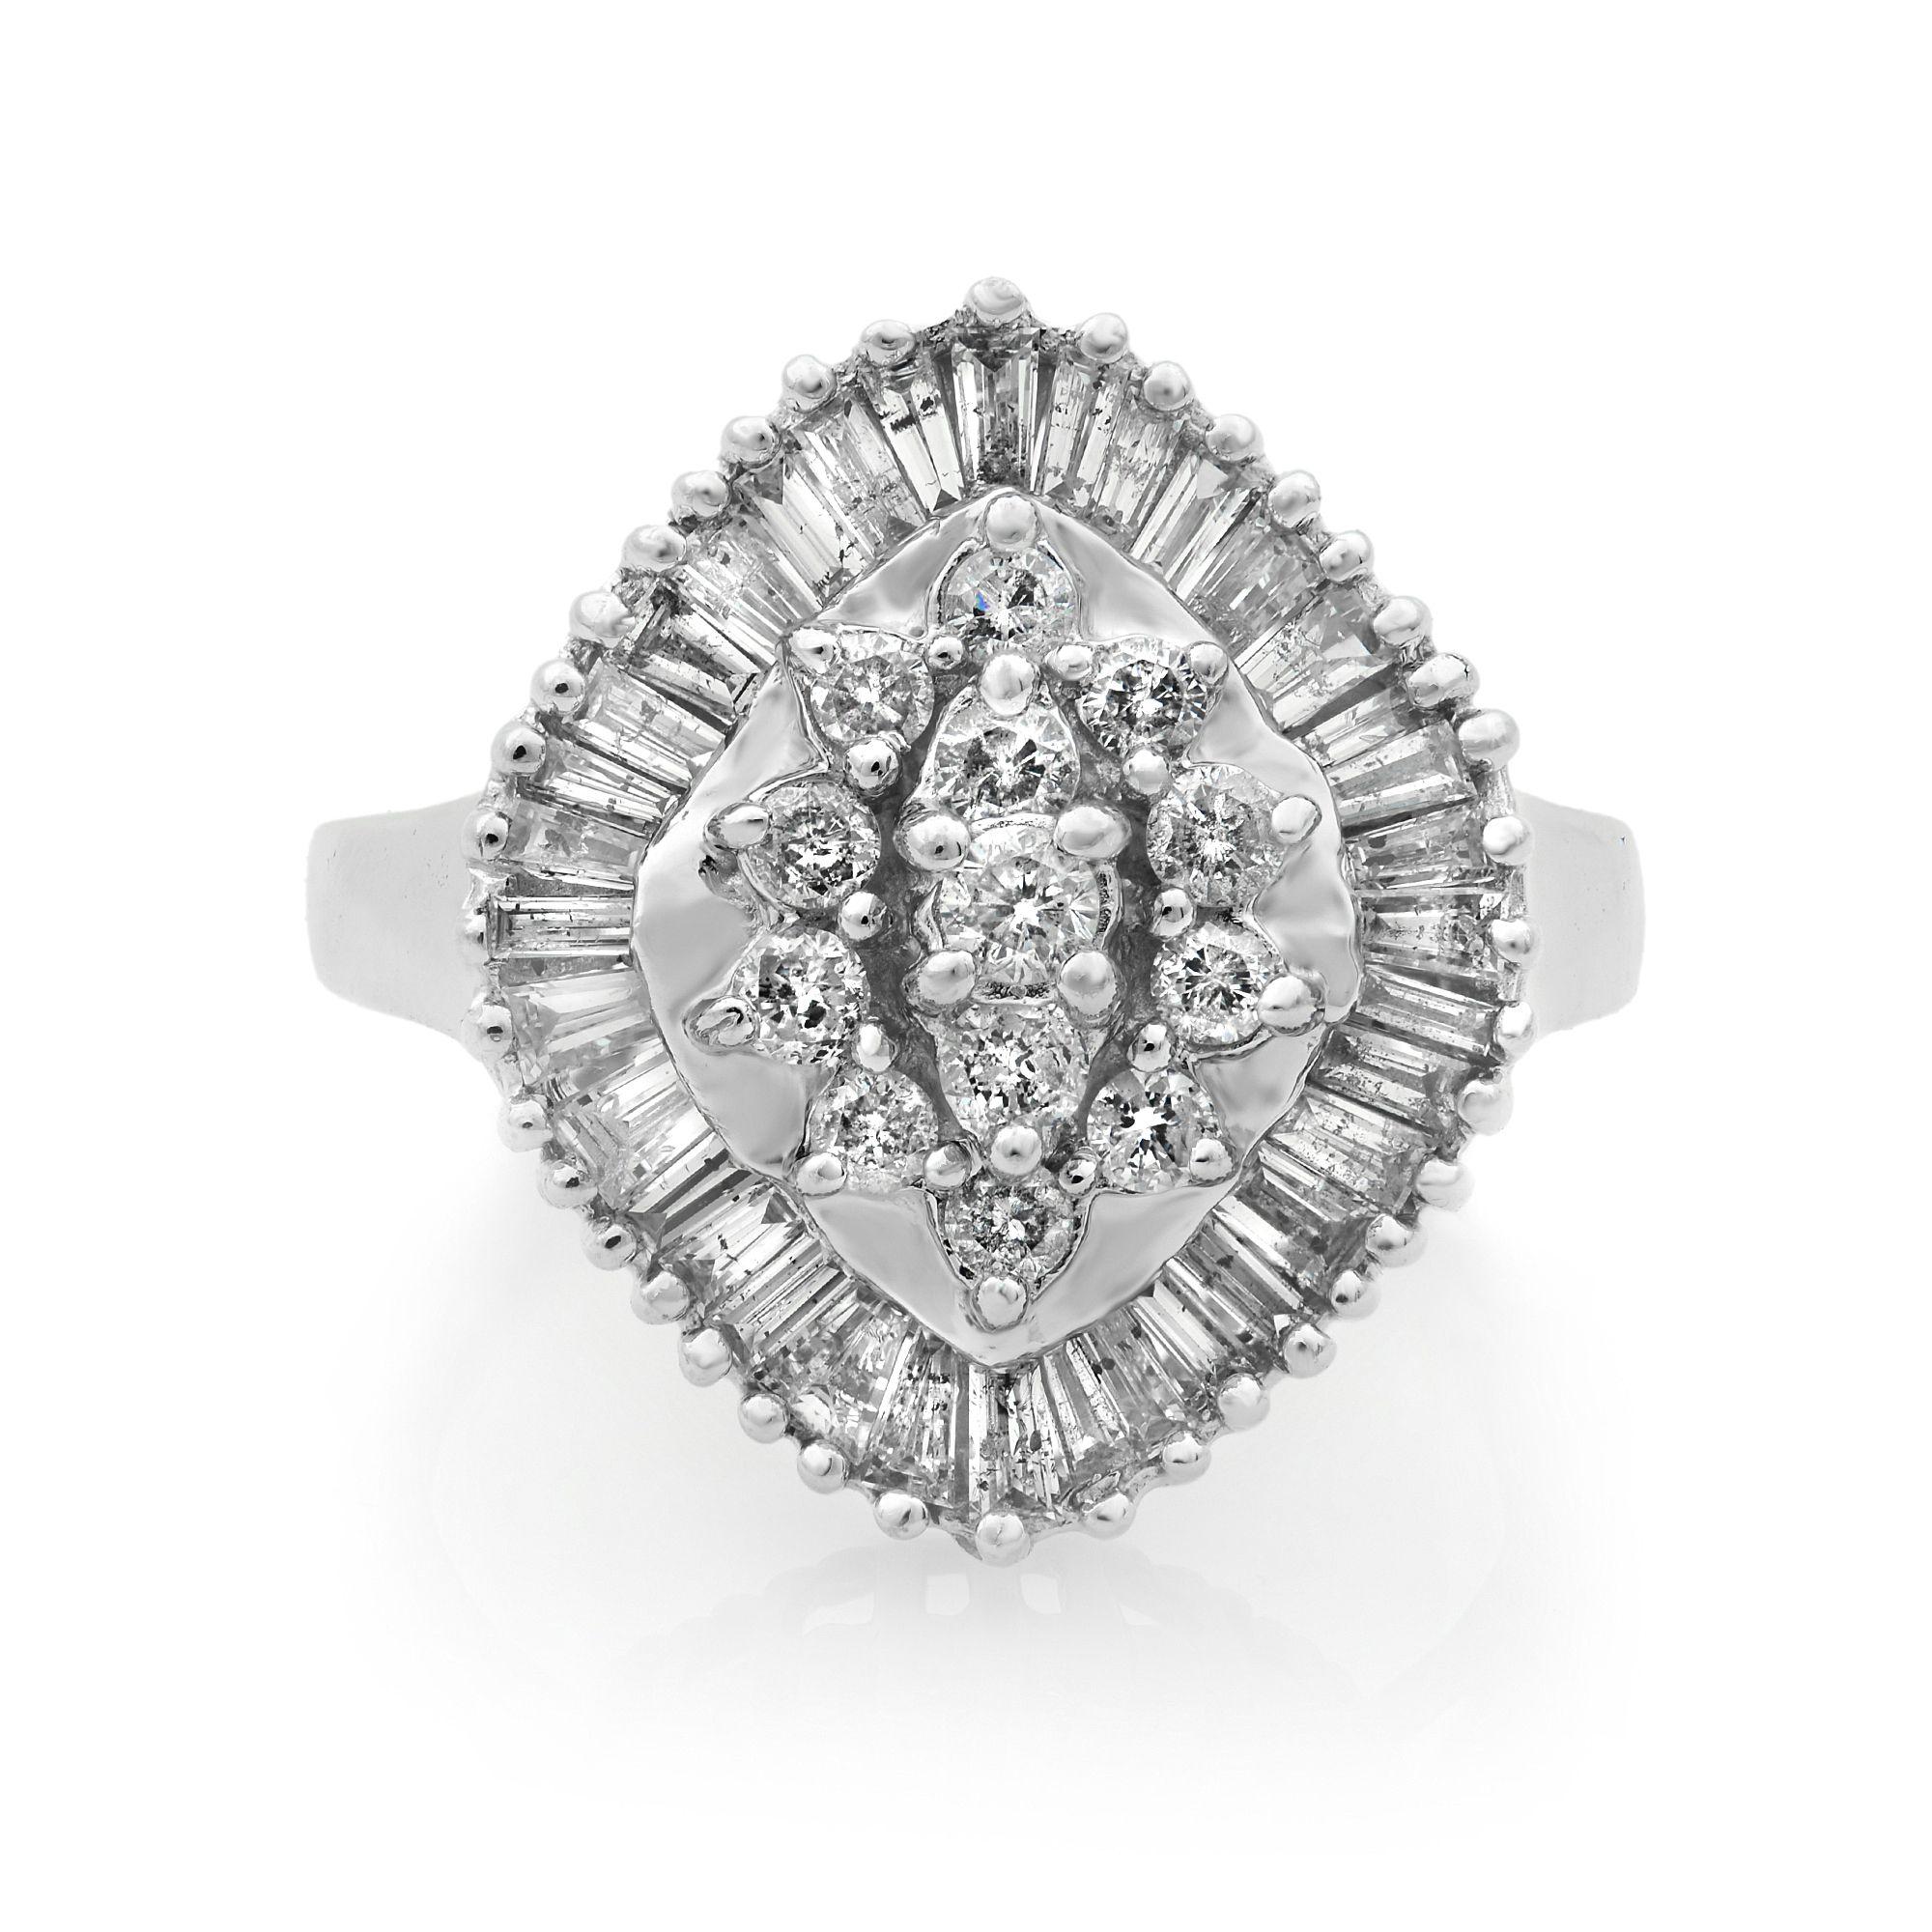 This special diamond cocktail ring embeds pure beauty of uniqueness and elegance. The combination of approximately 2.00 carat of round cut and baguette cut diamonds in G-H color and SI2 clarity set in prong setting are crafted in 14K white gold. Top